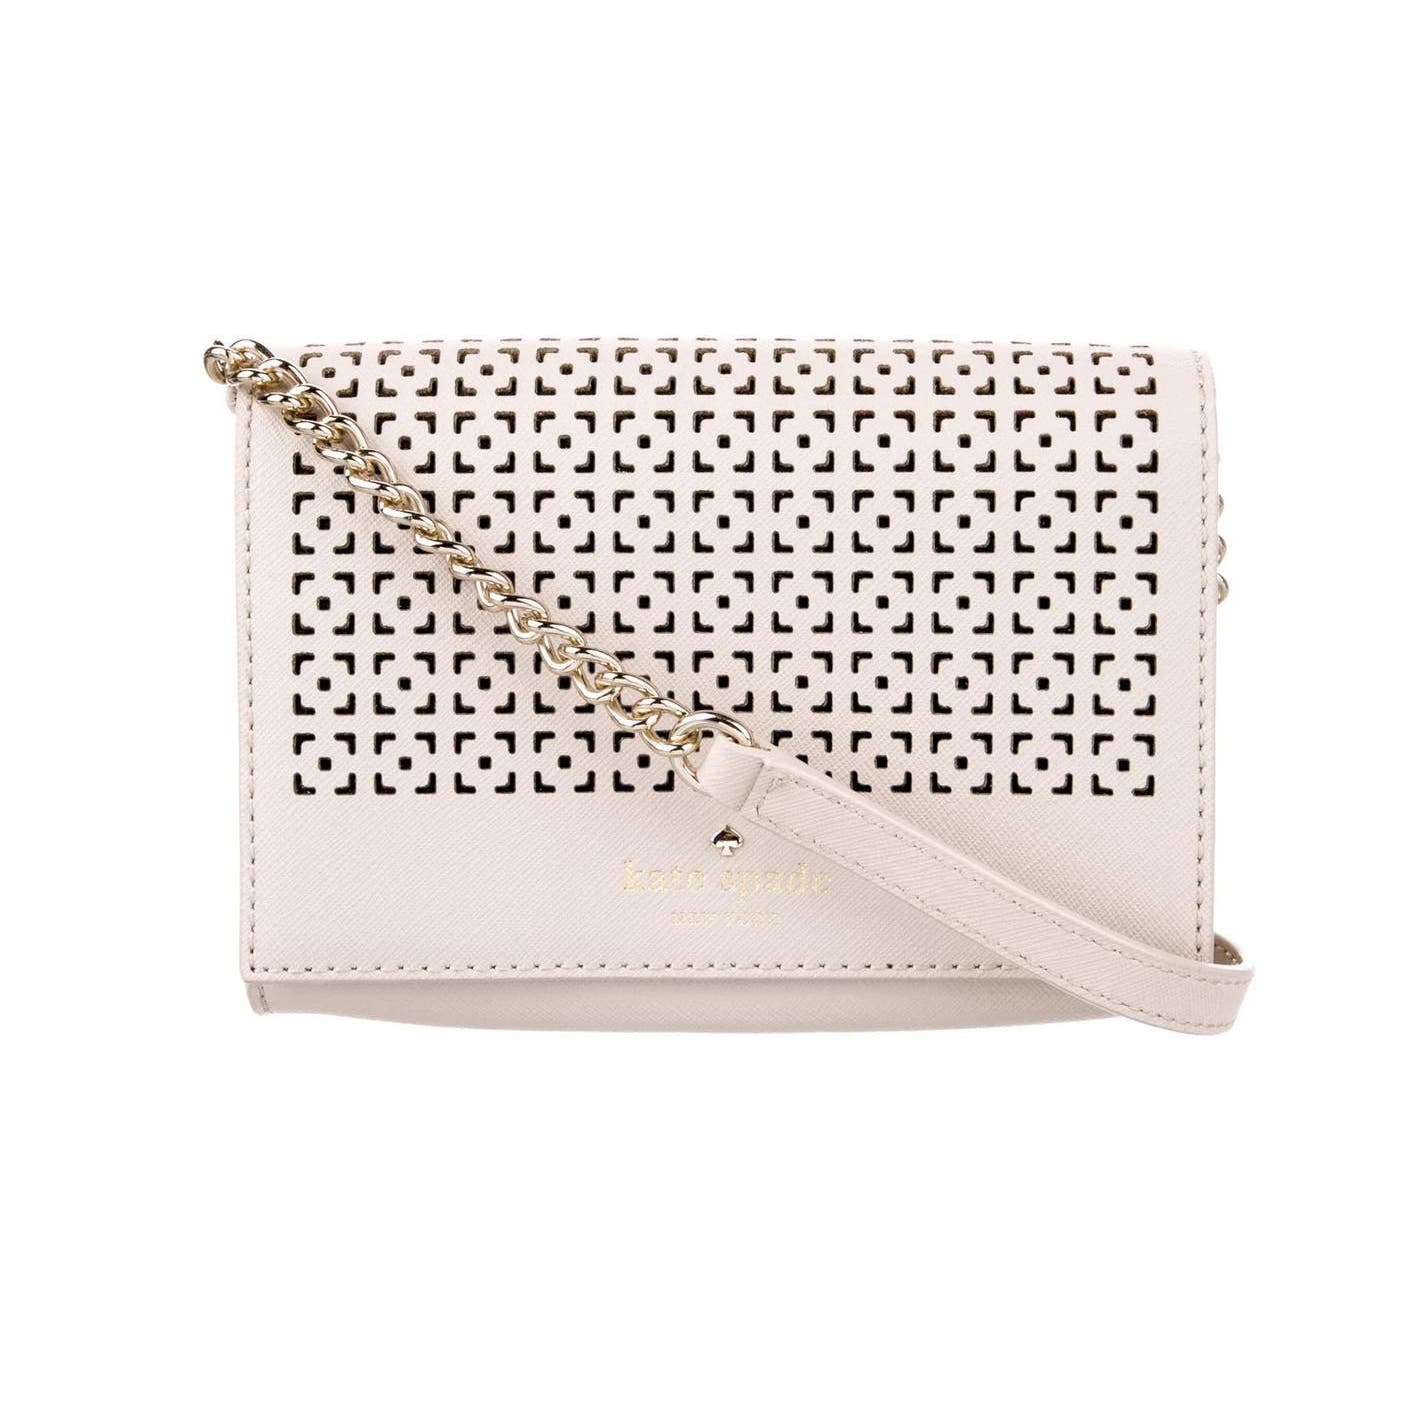 Kate Spade Perforated Leather Crossbody Purse White